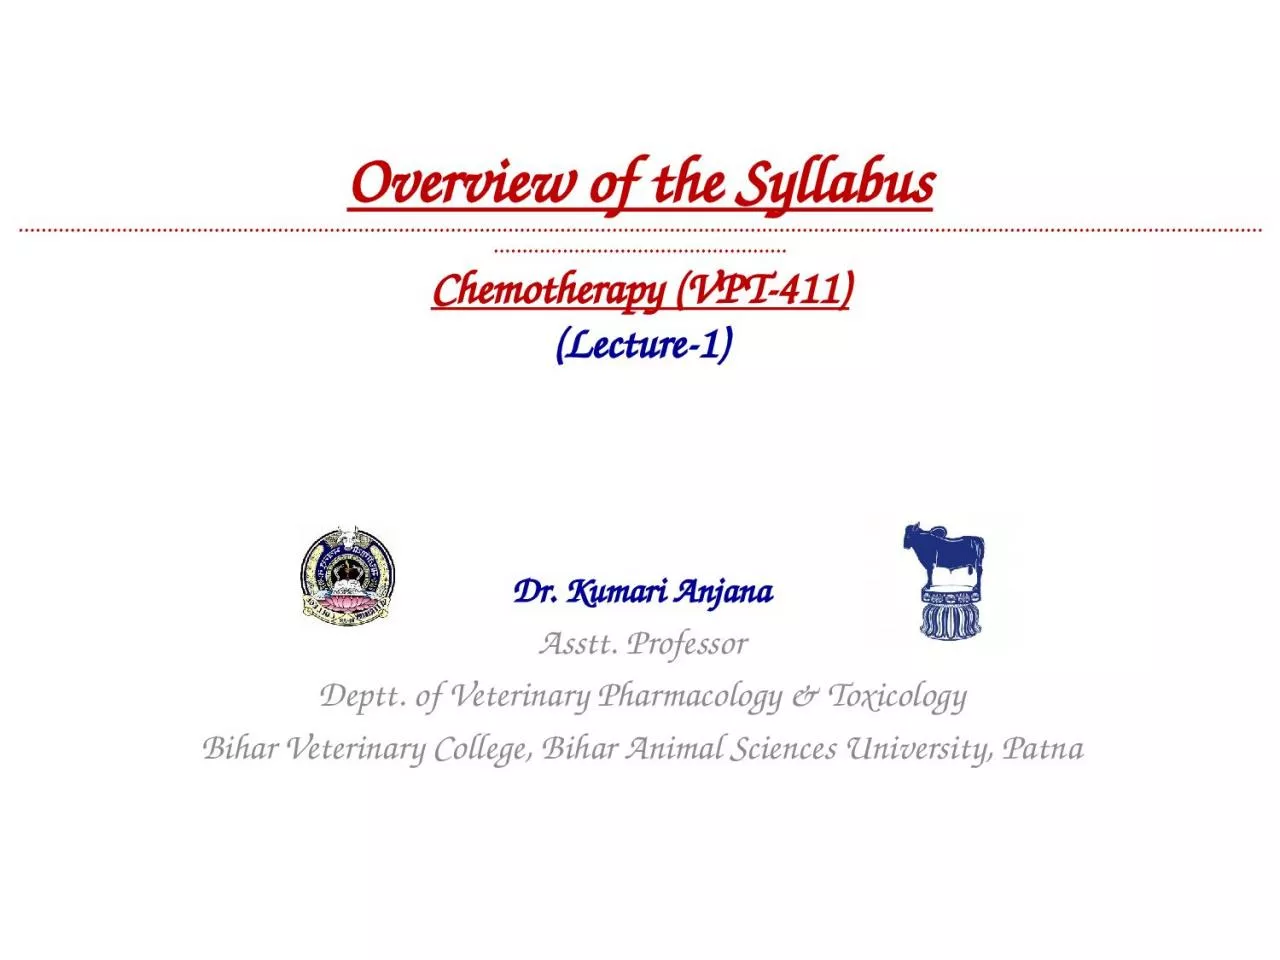 Overview of the Syllabus